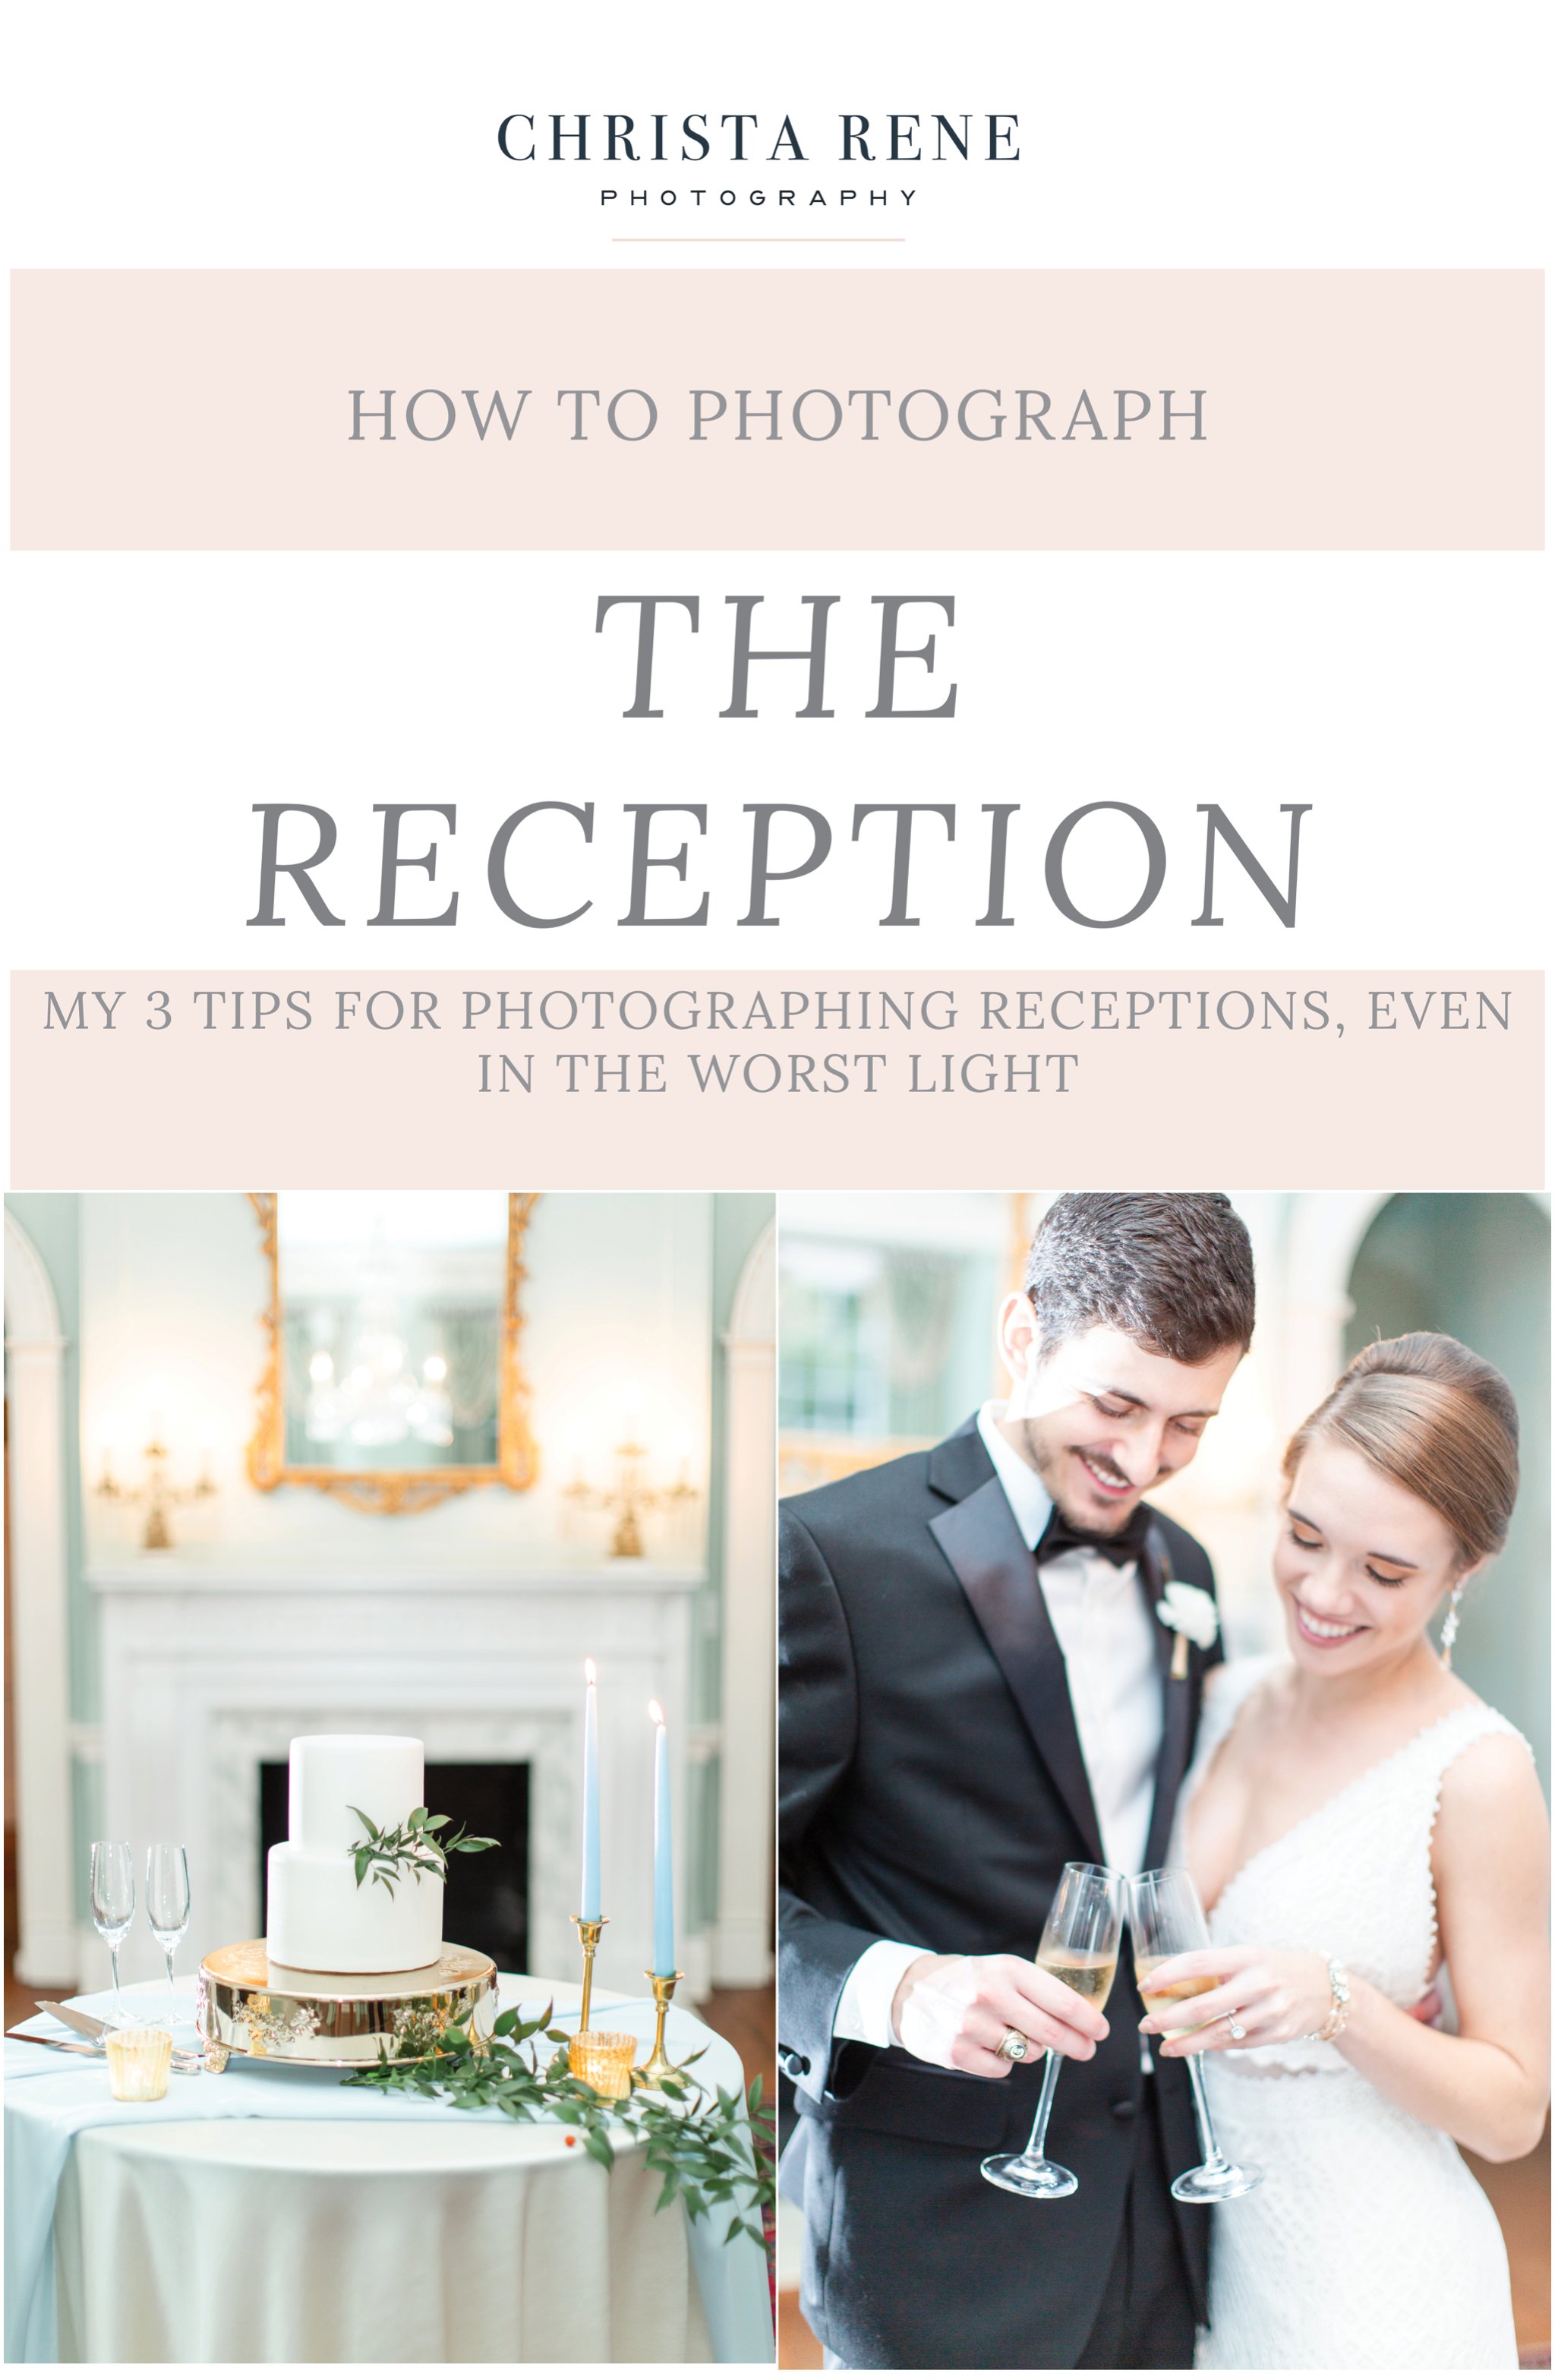 How to Photograph the Reception | How to use Off-Camera-Flash | Christa Rene Photography